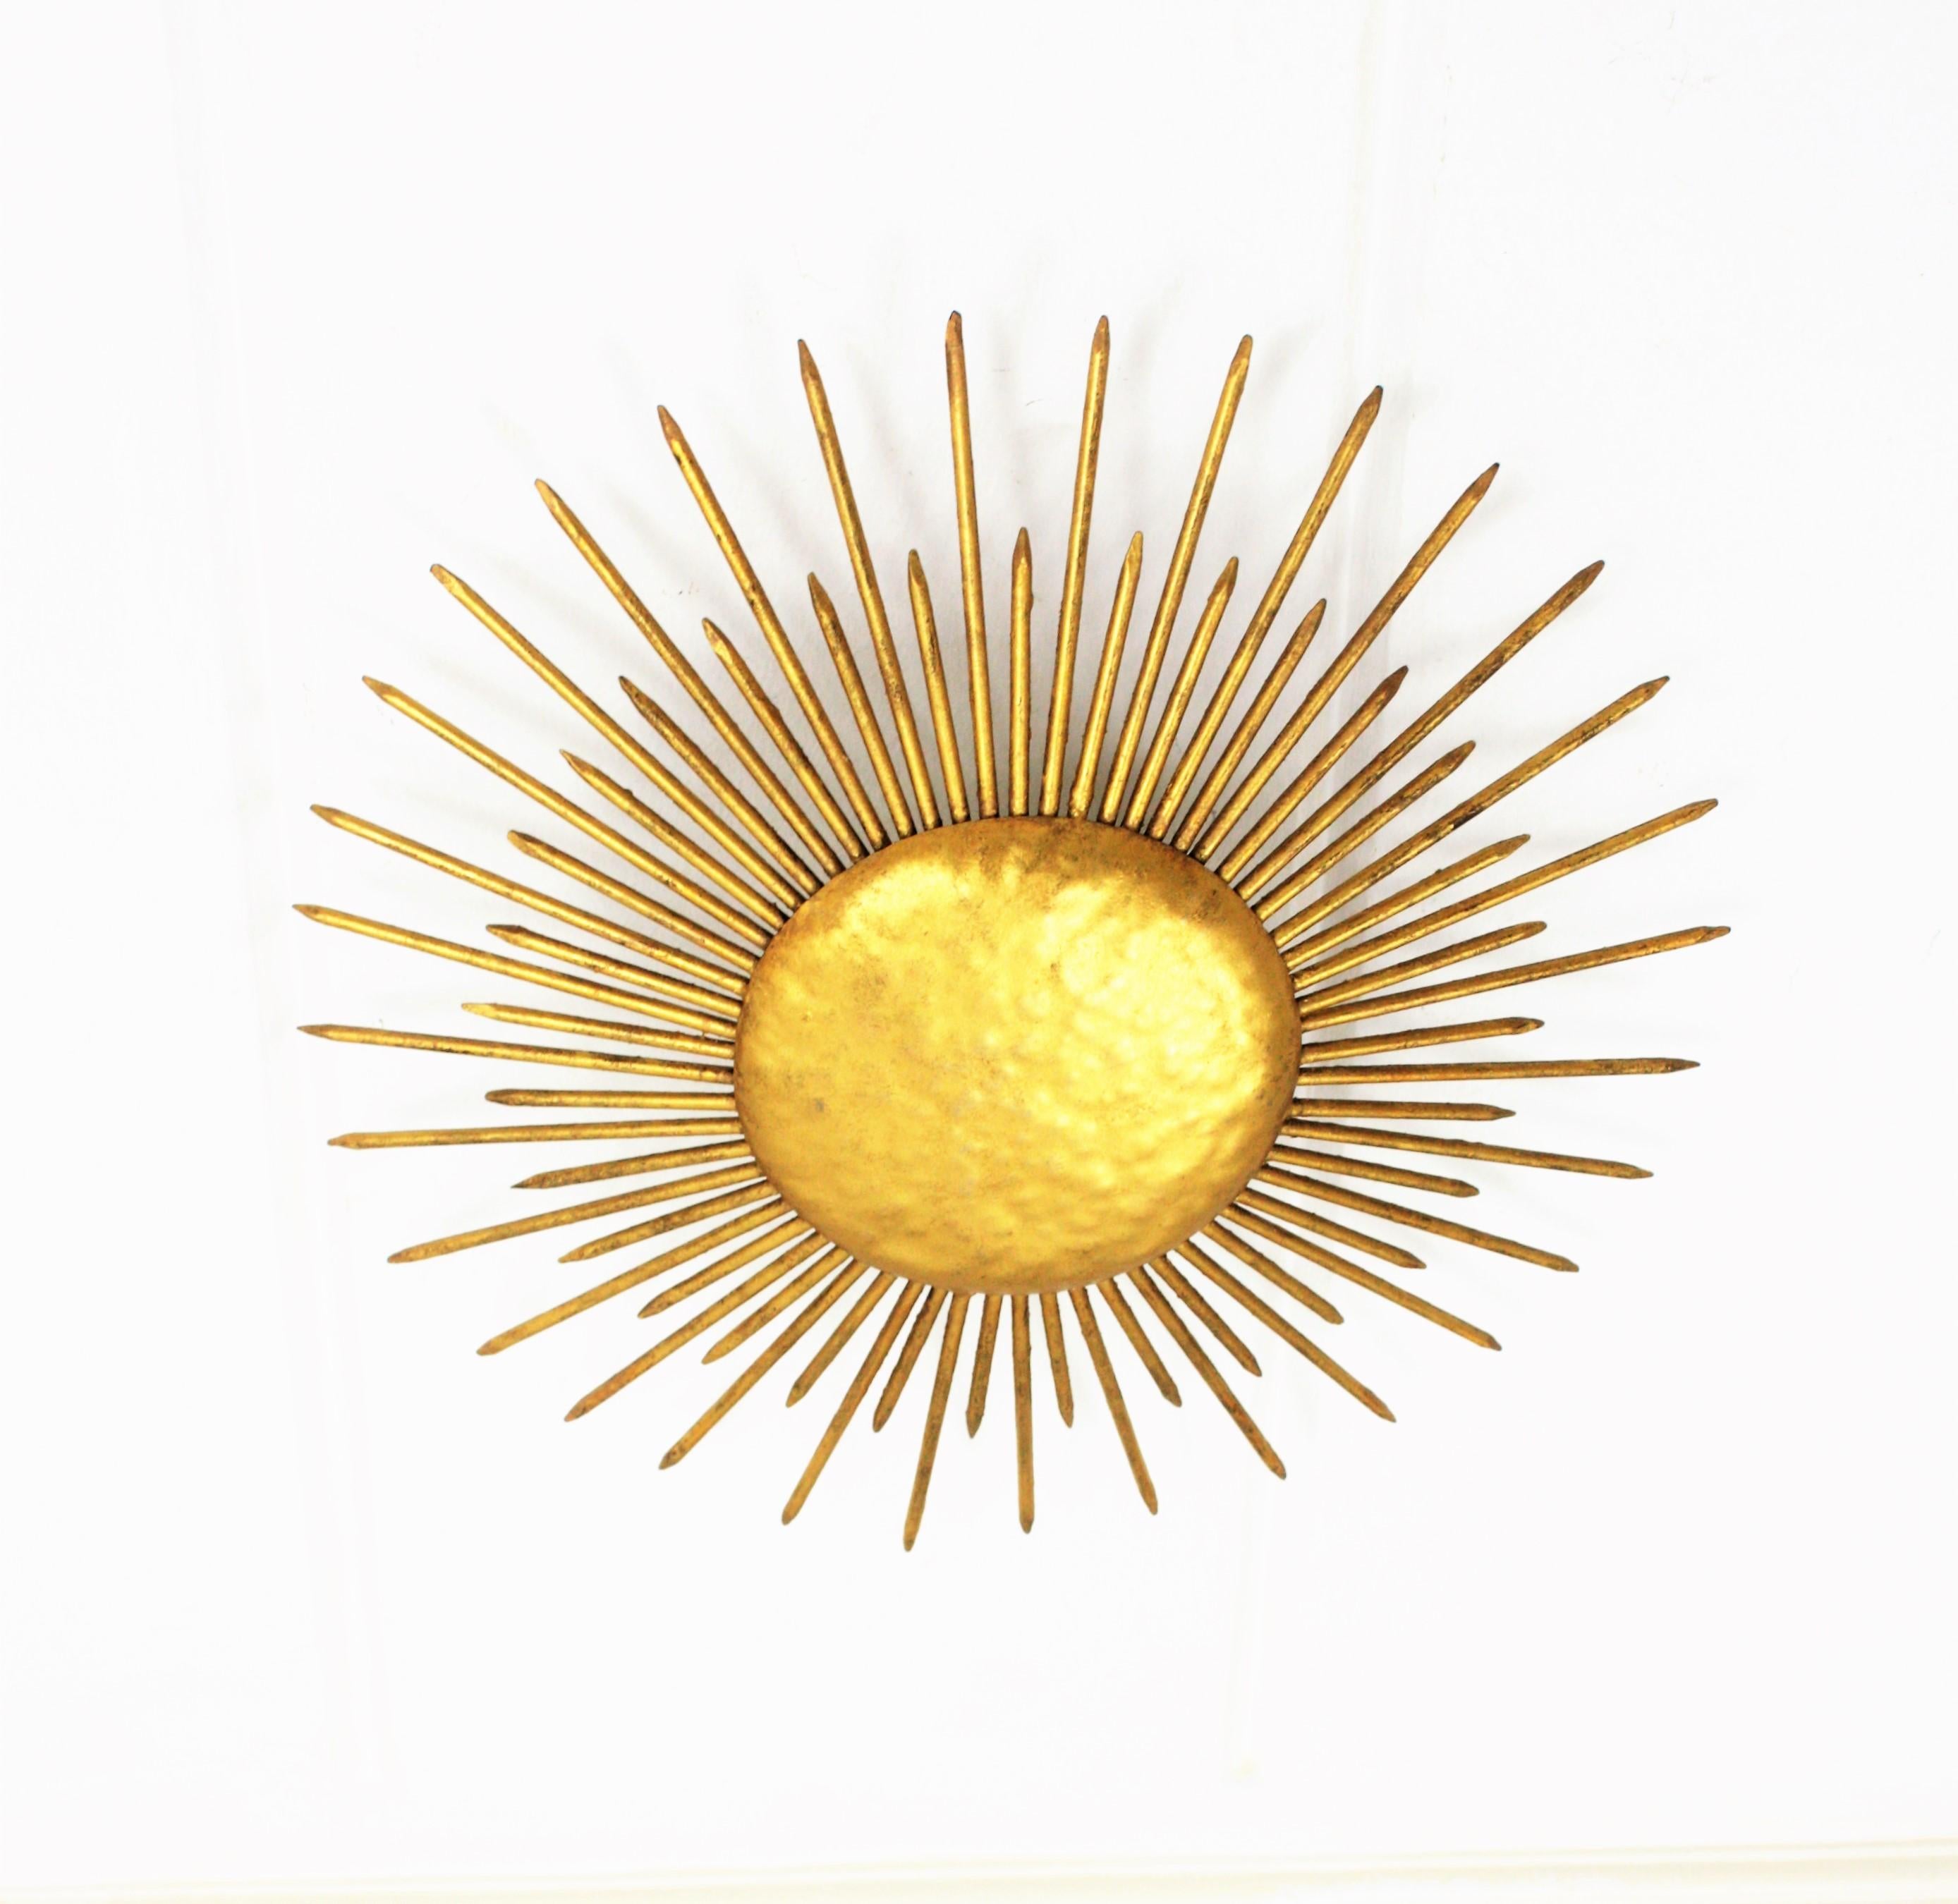 French wrought gilt iron sunburst light fixture with nails details. France, 1930s-1940s.
Gorgeous hand-hammered gilt iron sunburst ceiling light fixture or wall sconce with gold leaf finish and Art Deco accents in transition to Brutalist style. A